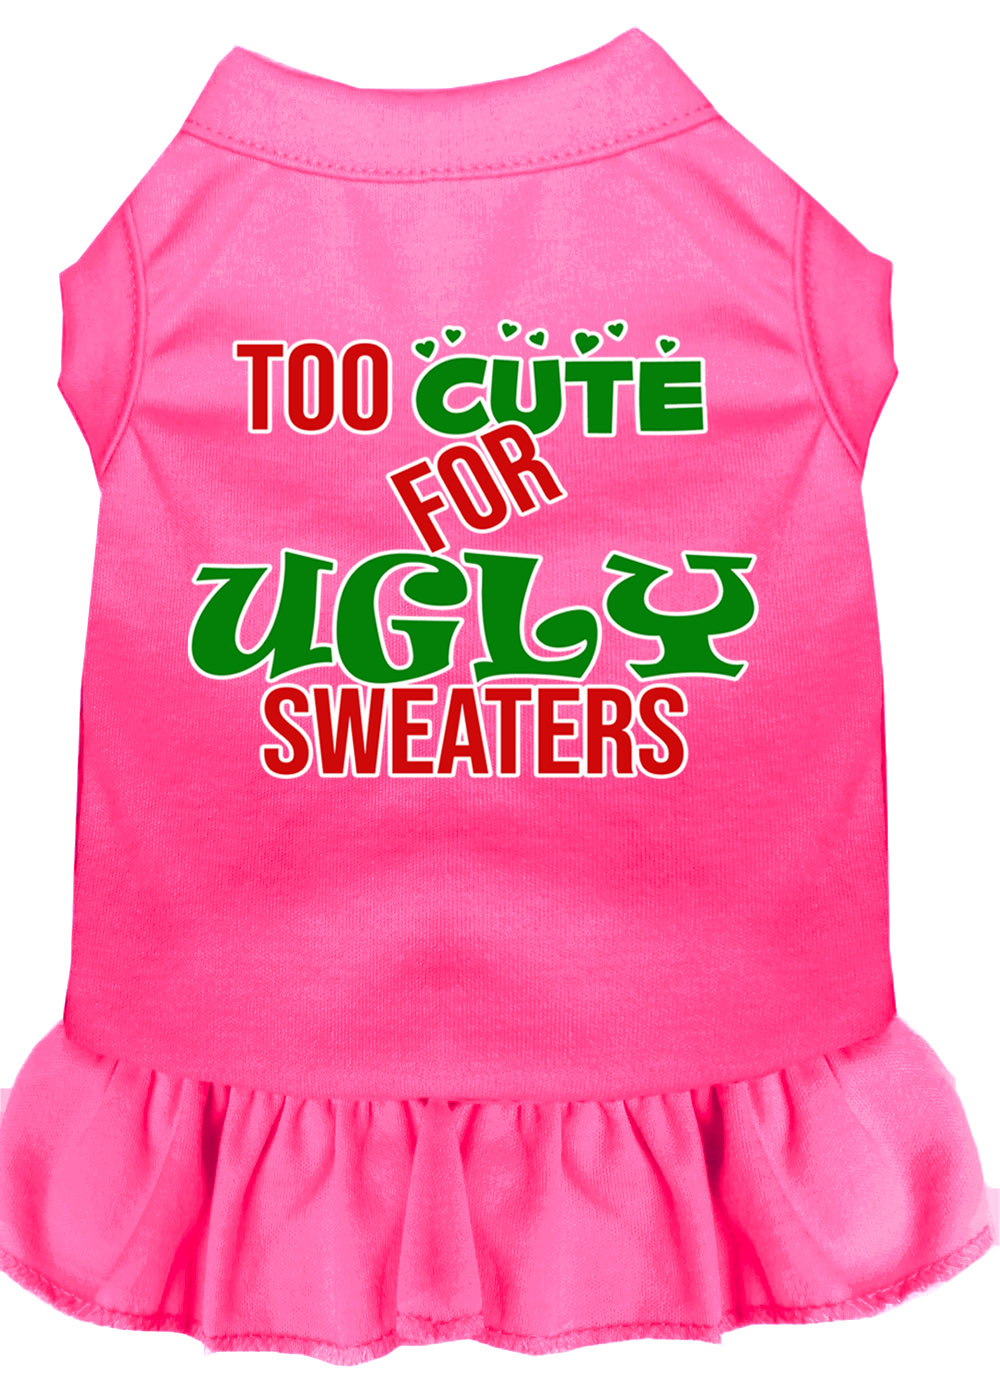 Too Cute for Ugly Sweaters Screen Print Dog Dress Bright Pink XL